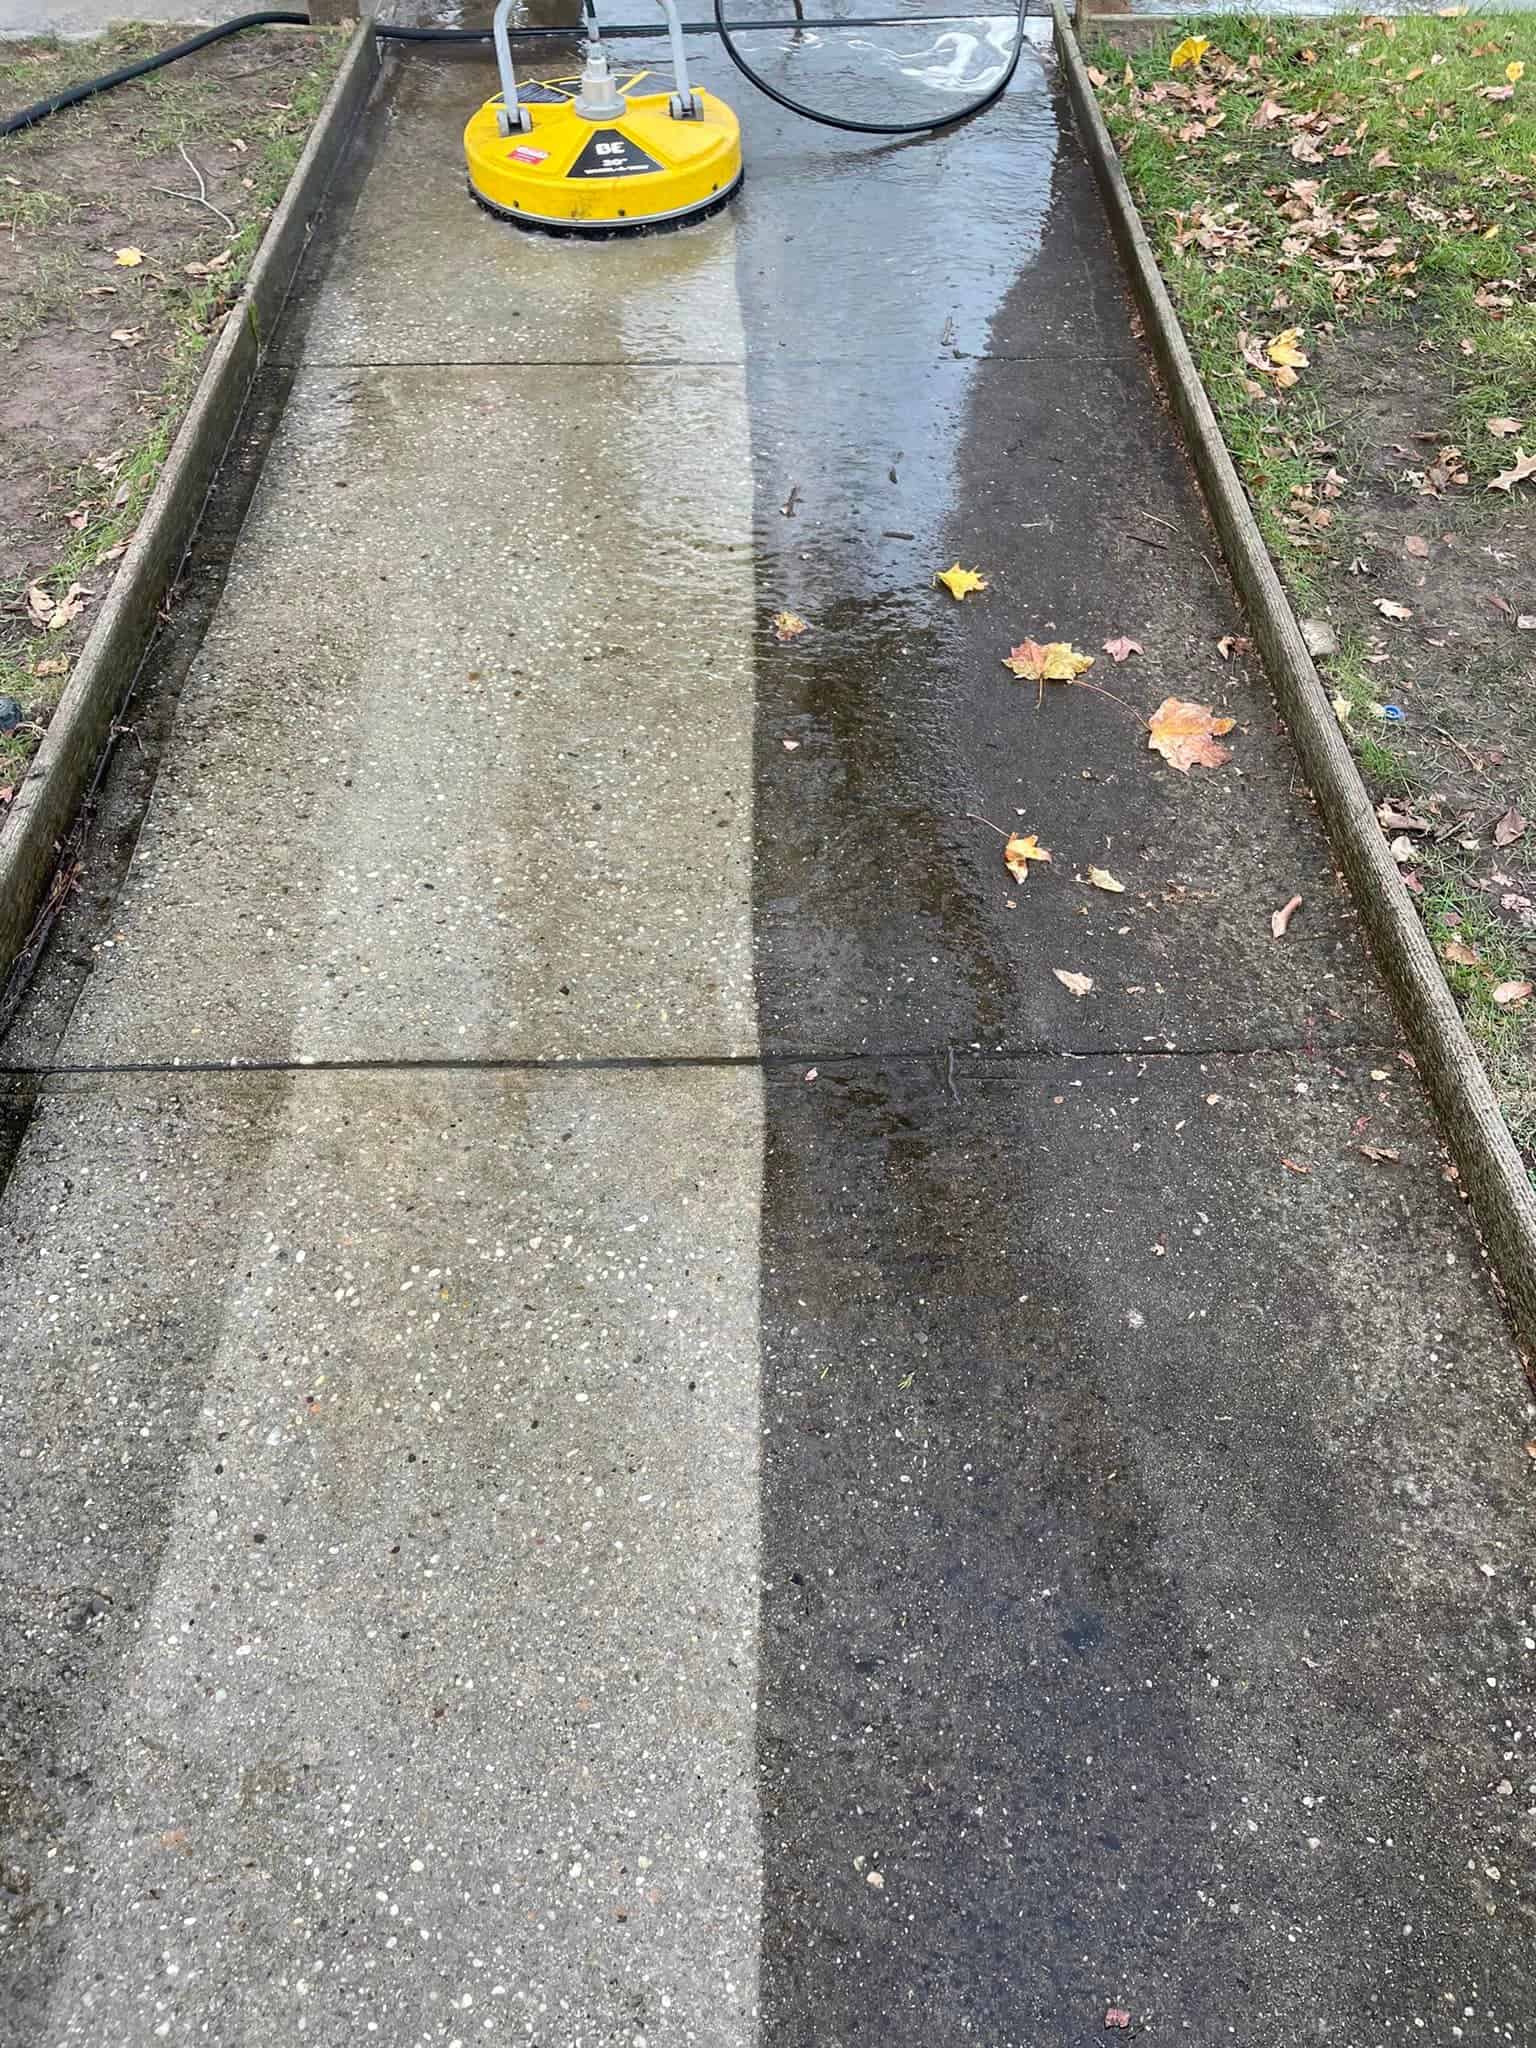 Power Washing Services Near Me in Cold Spring Harbor, NY